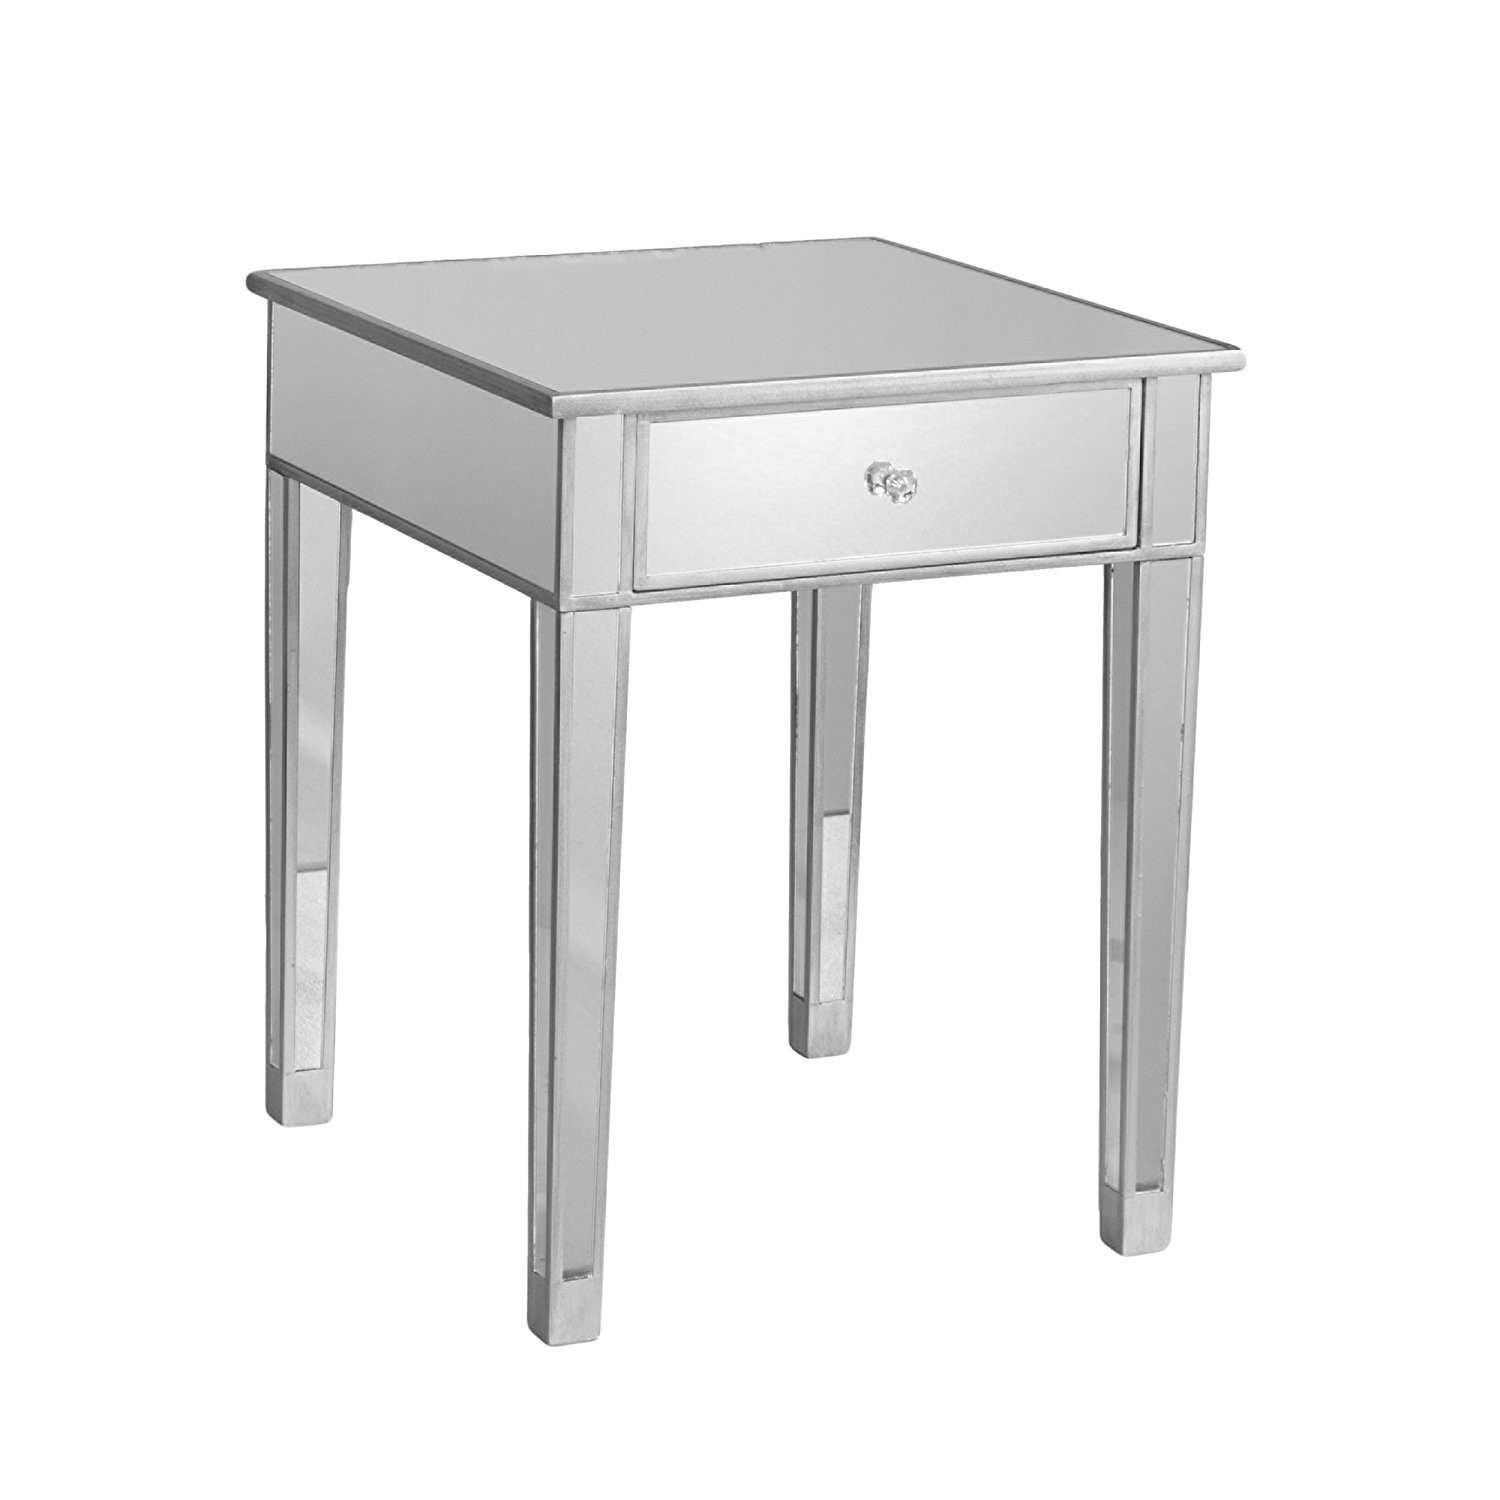 small bathroom accent tables table ideas for best glass mirrored beautiful touch pair nightstands concrete outdoor bunnings battery operated led lights piece patio dining sets